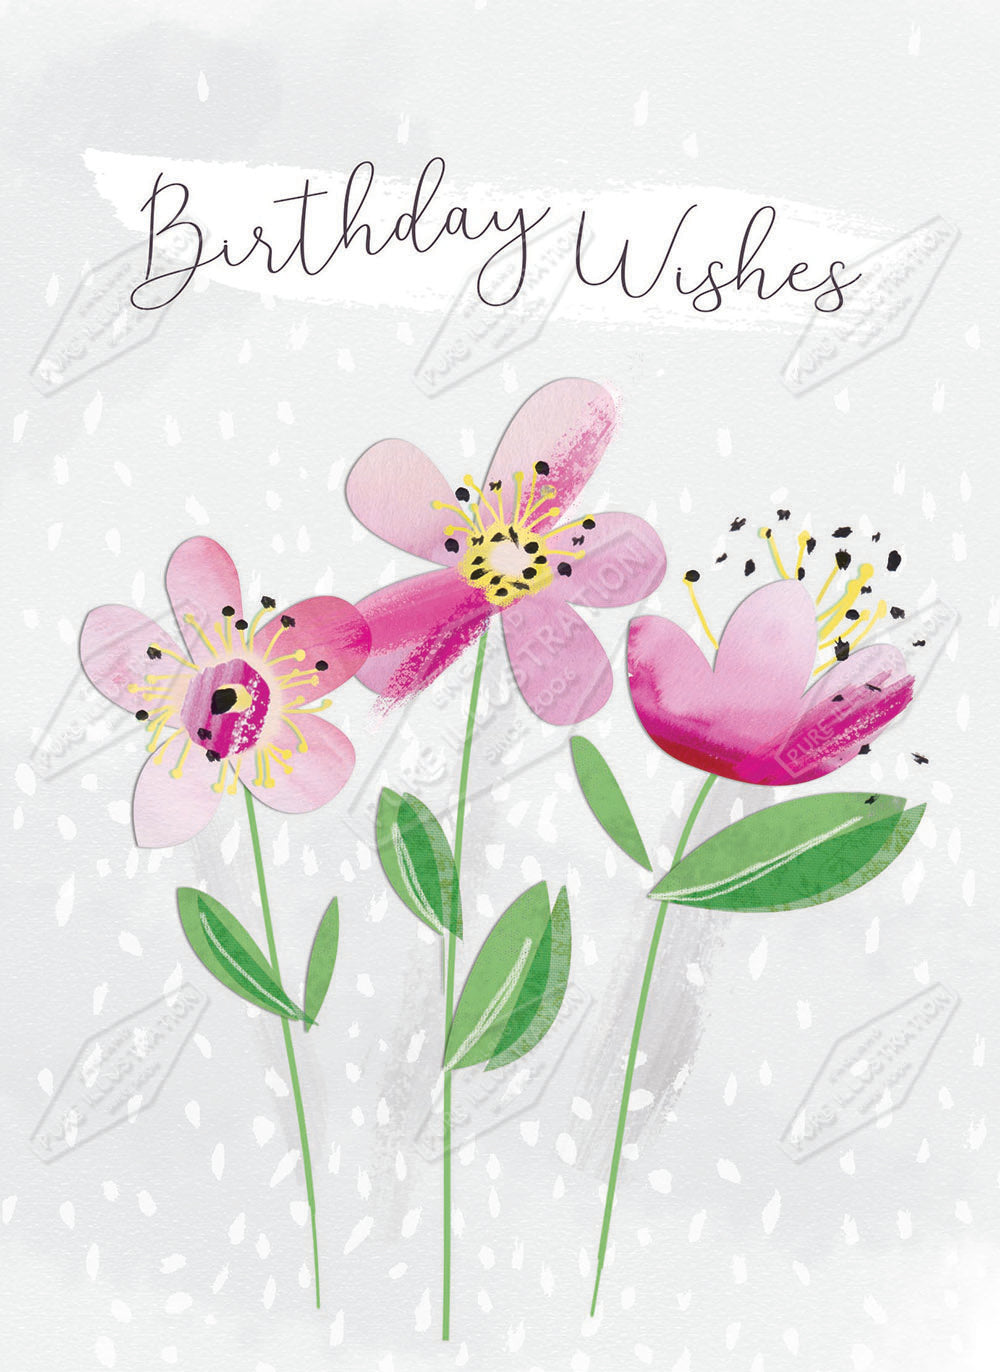 00032475SLA- Sarah Lake is represented by Pure Art Licensing Agency - Birthday Greeting Card Design